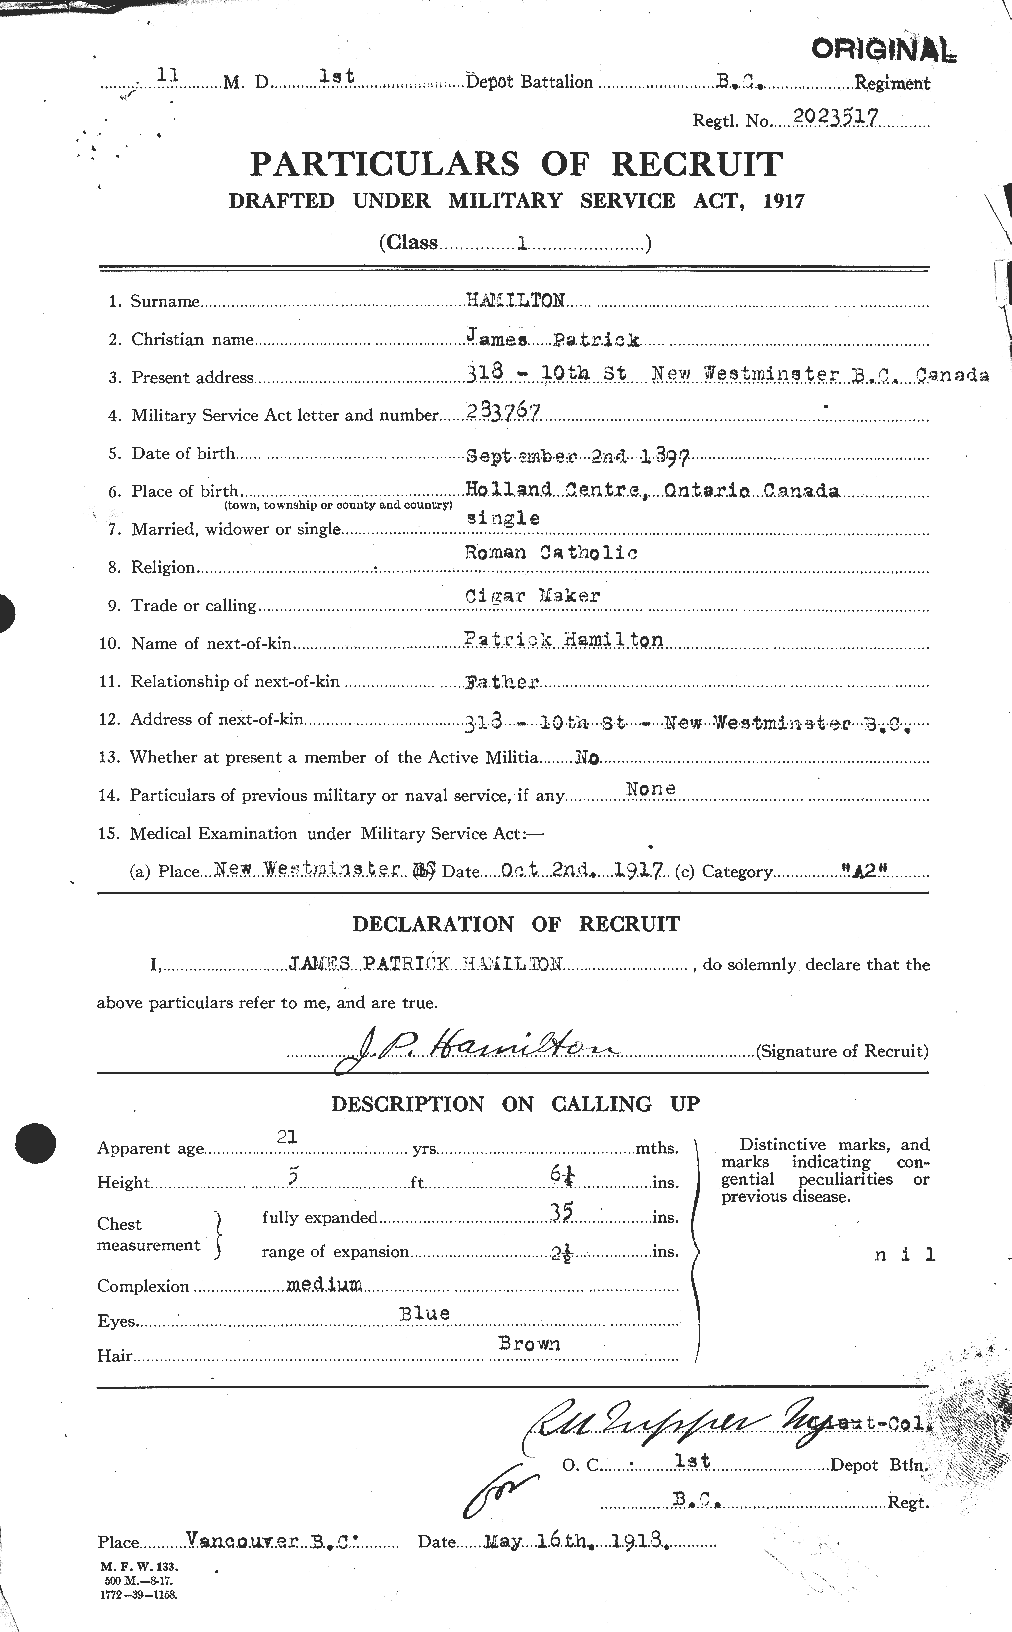 Personnel Records of the First World War - CEF 372994a